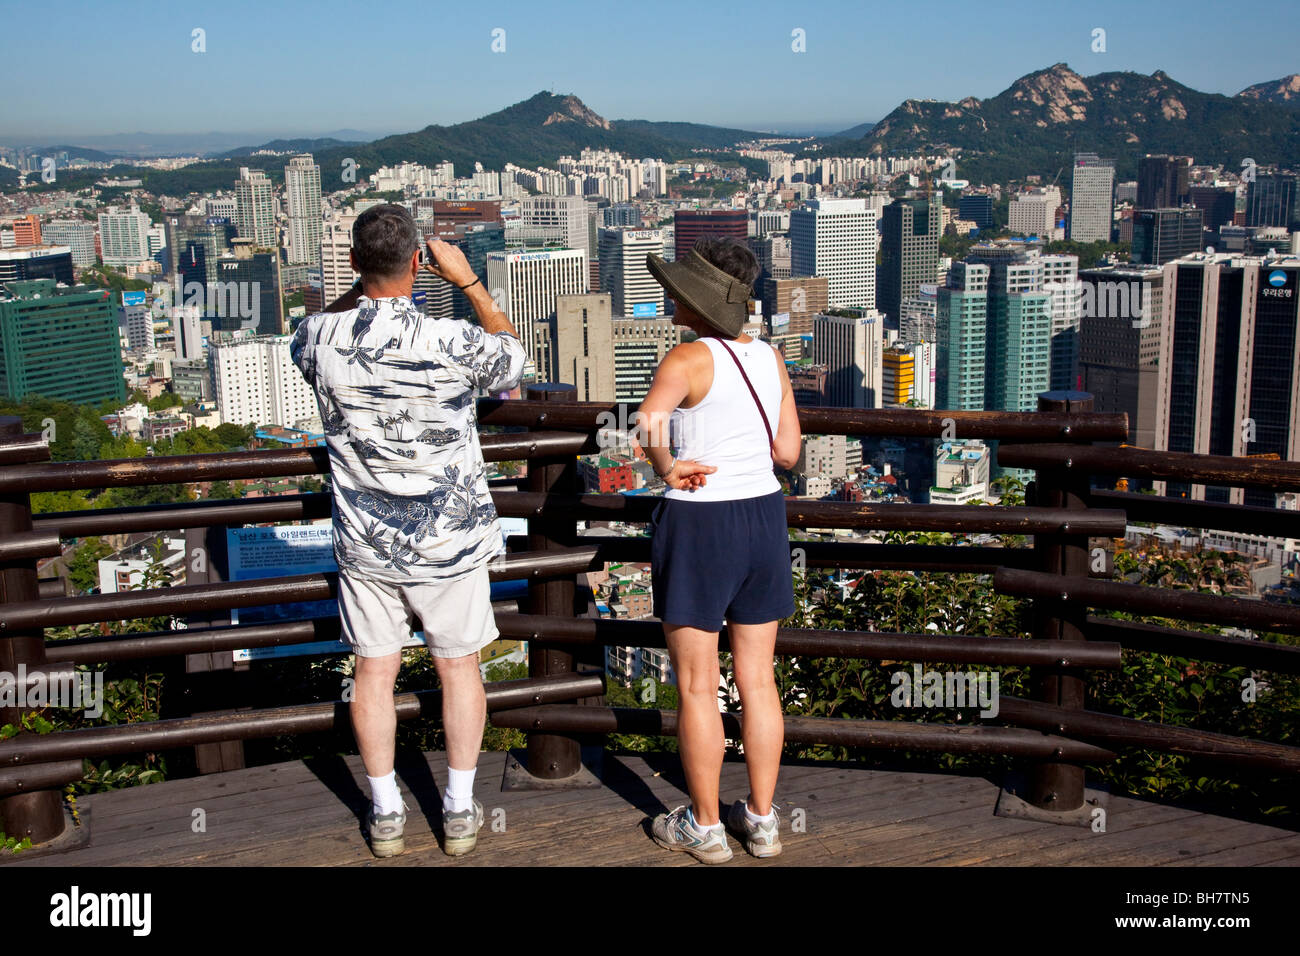 American Military Personnel sightseeing in Seoul south Korea Stock Photo